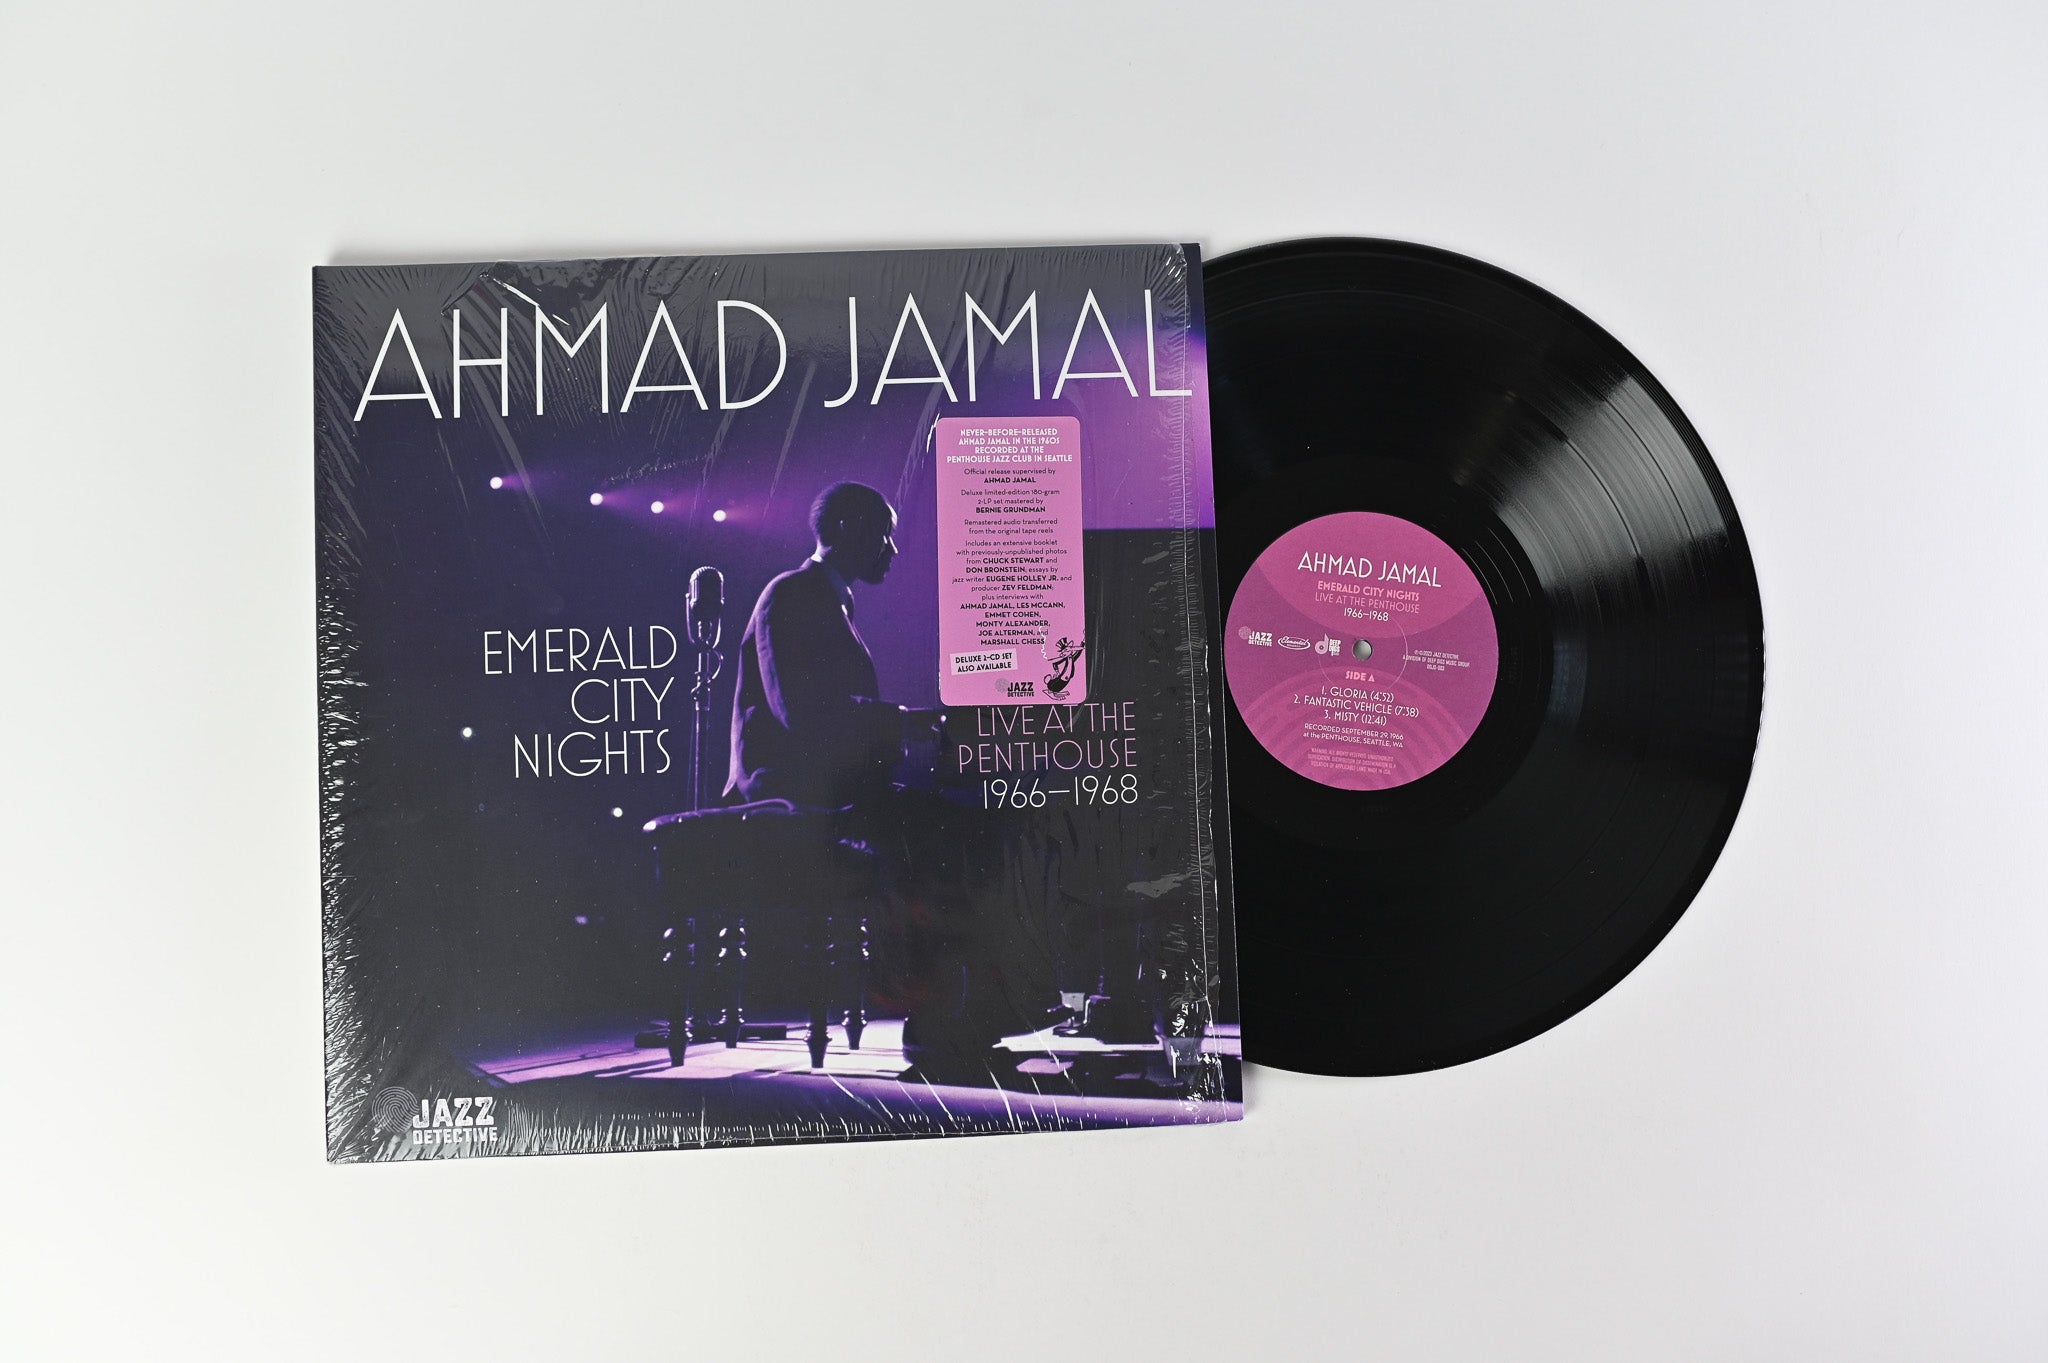 Ahmad Jamal - Emerald City Nights: Live At The Penthouse (1966-1968) on Jazz Detective RSD Black Friday 2023 Ltd Numbered